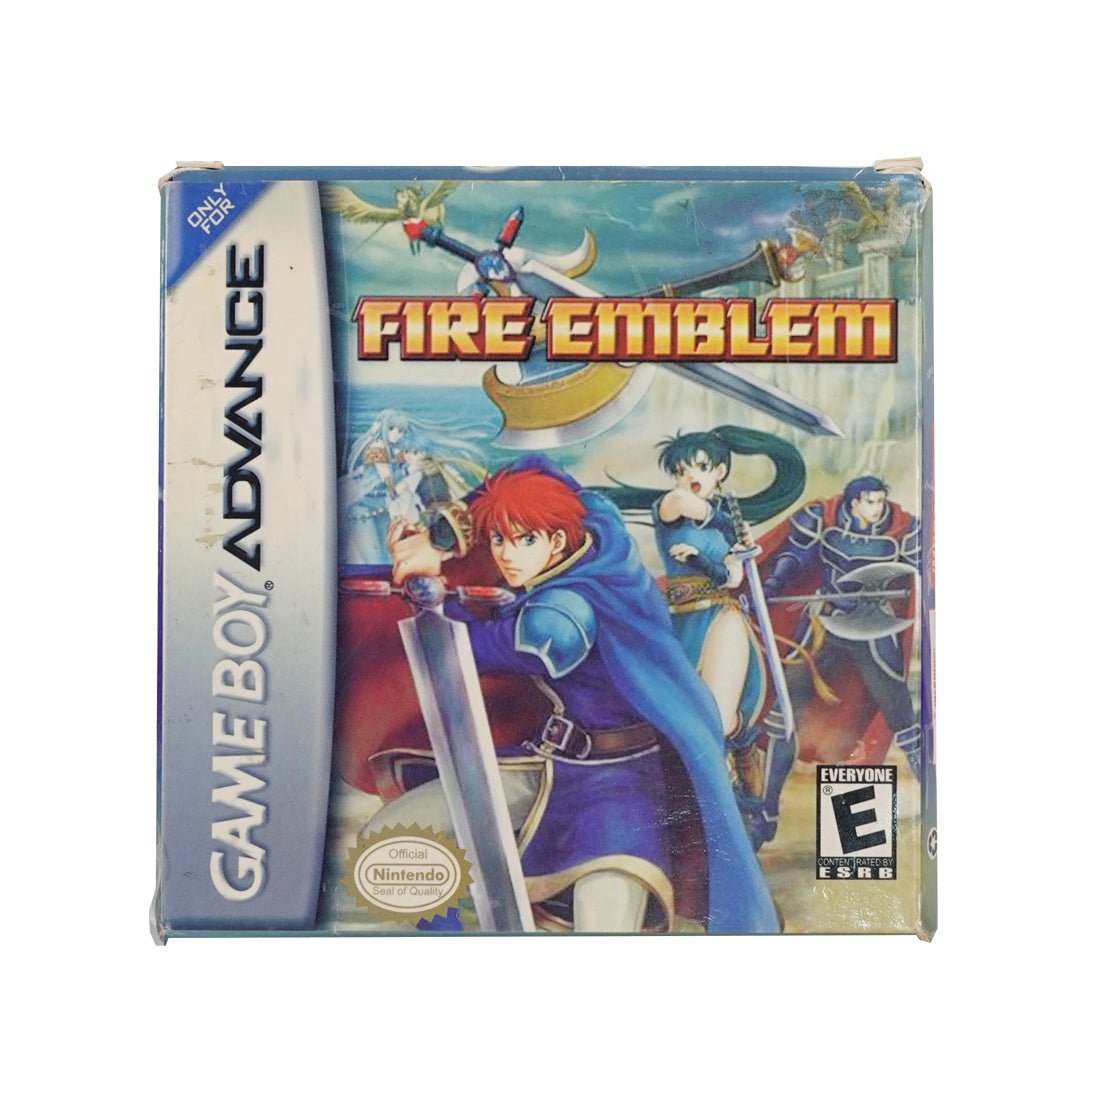 (Pre-Owned) Fire Emblem - Gameboy Advance - Store 974 | ستور ٩٧٤